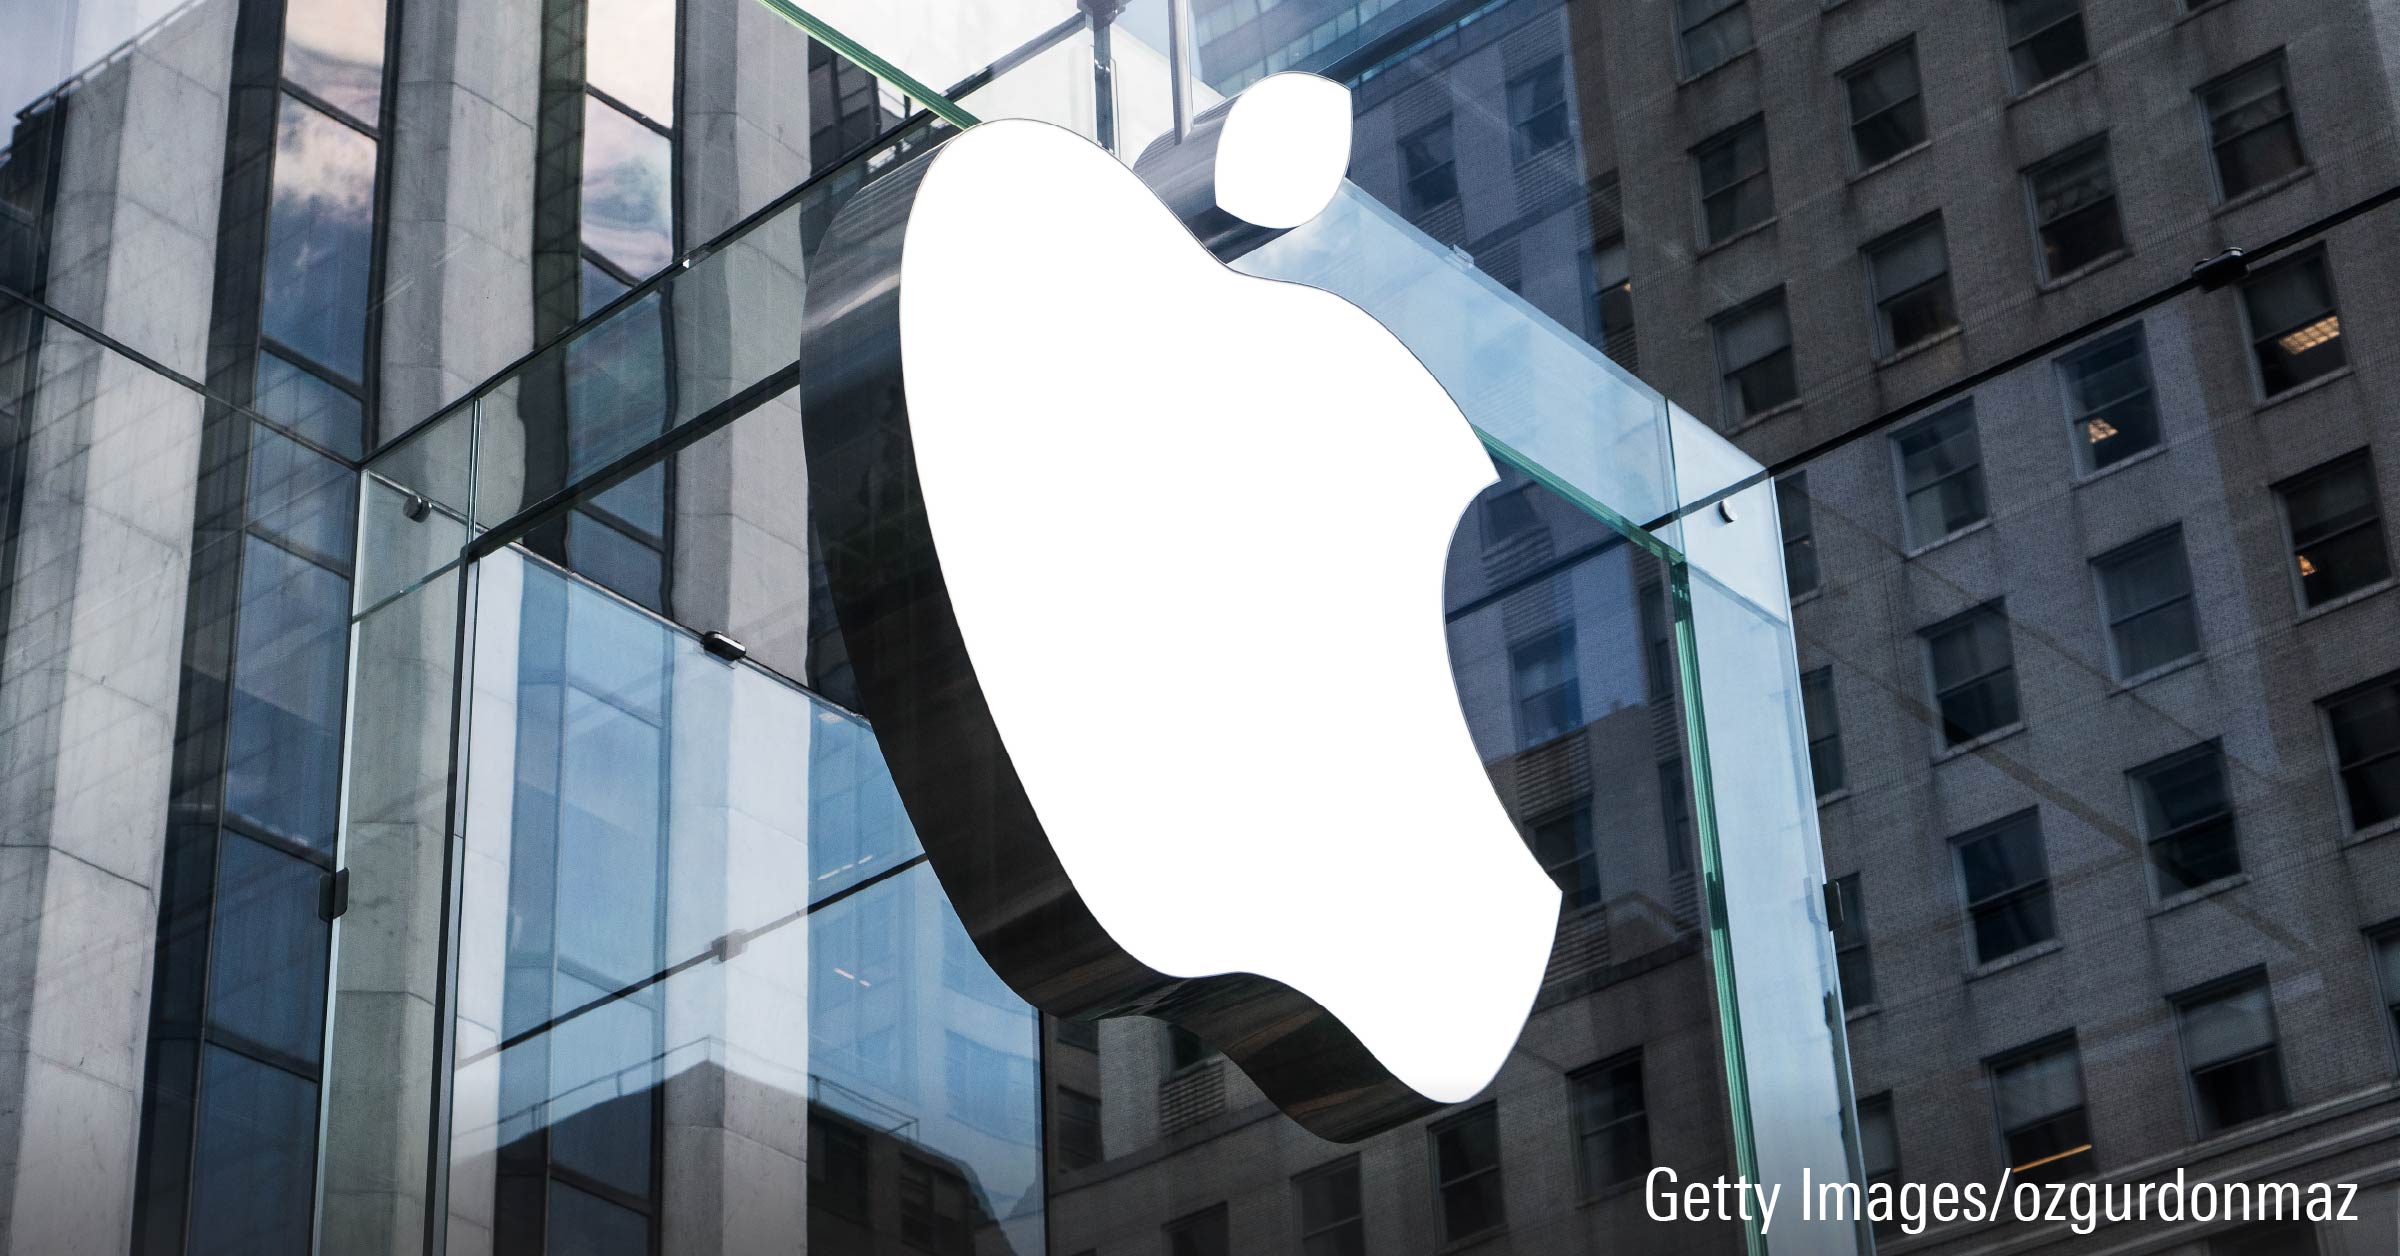 Apple logo icon displayed on window glass of building